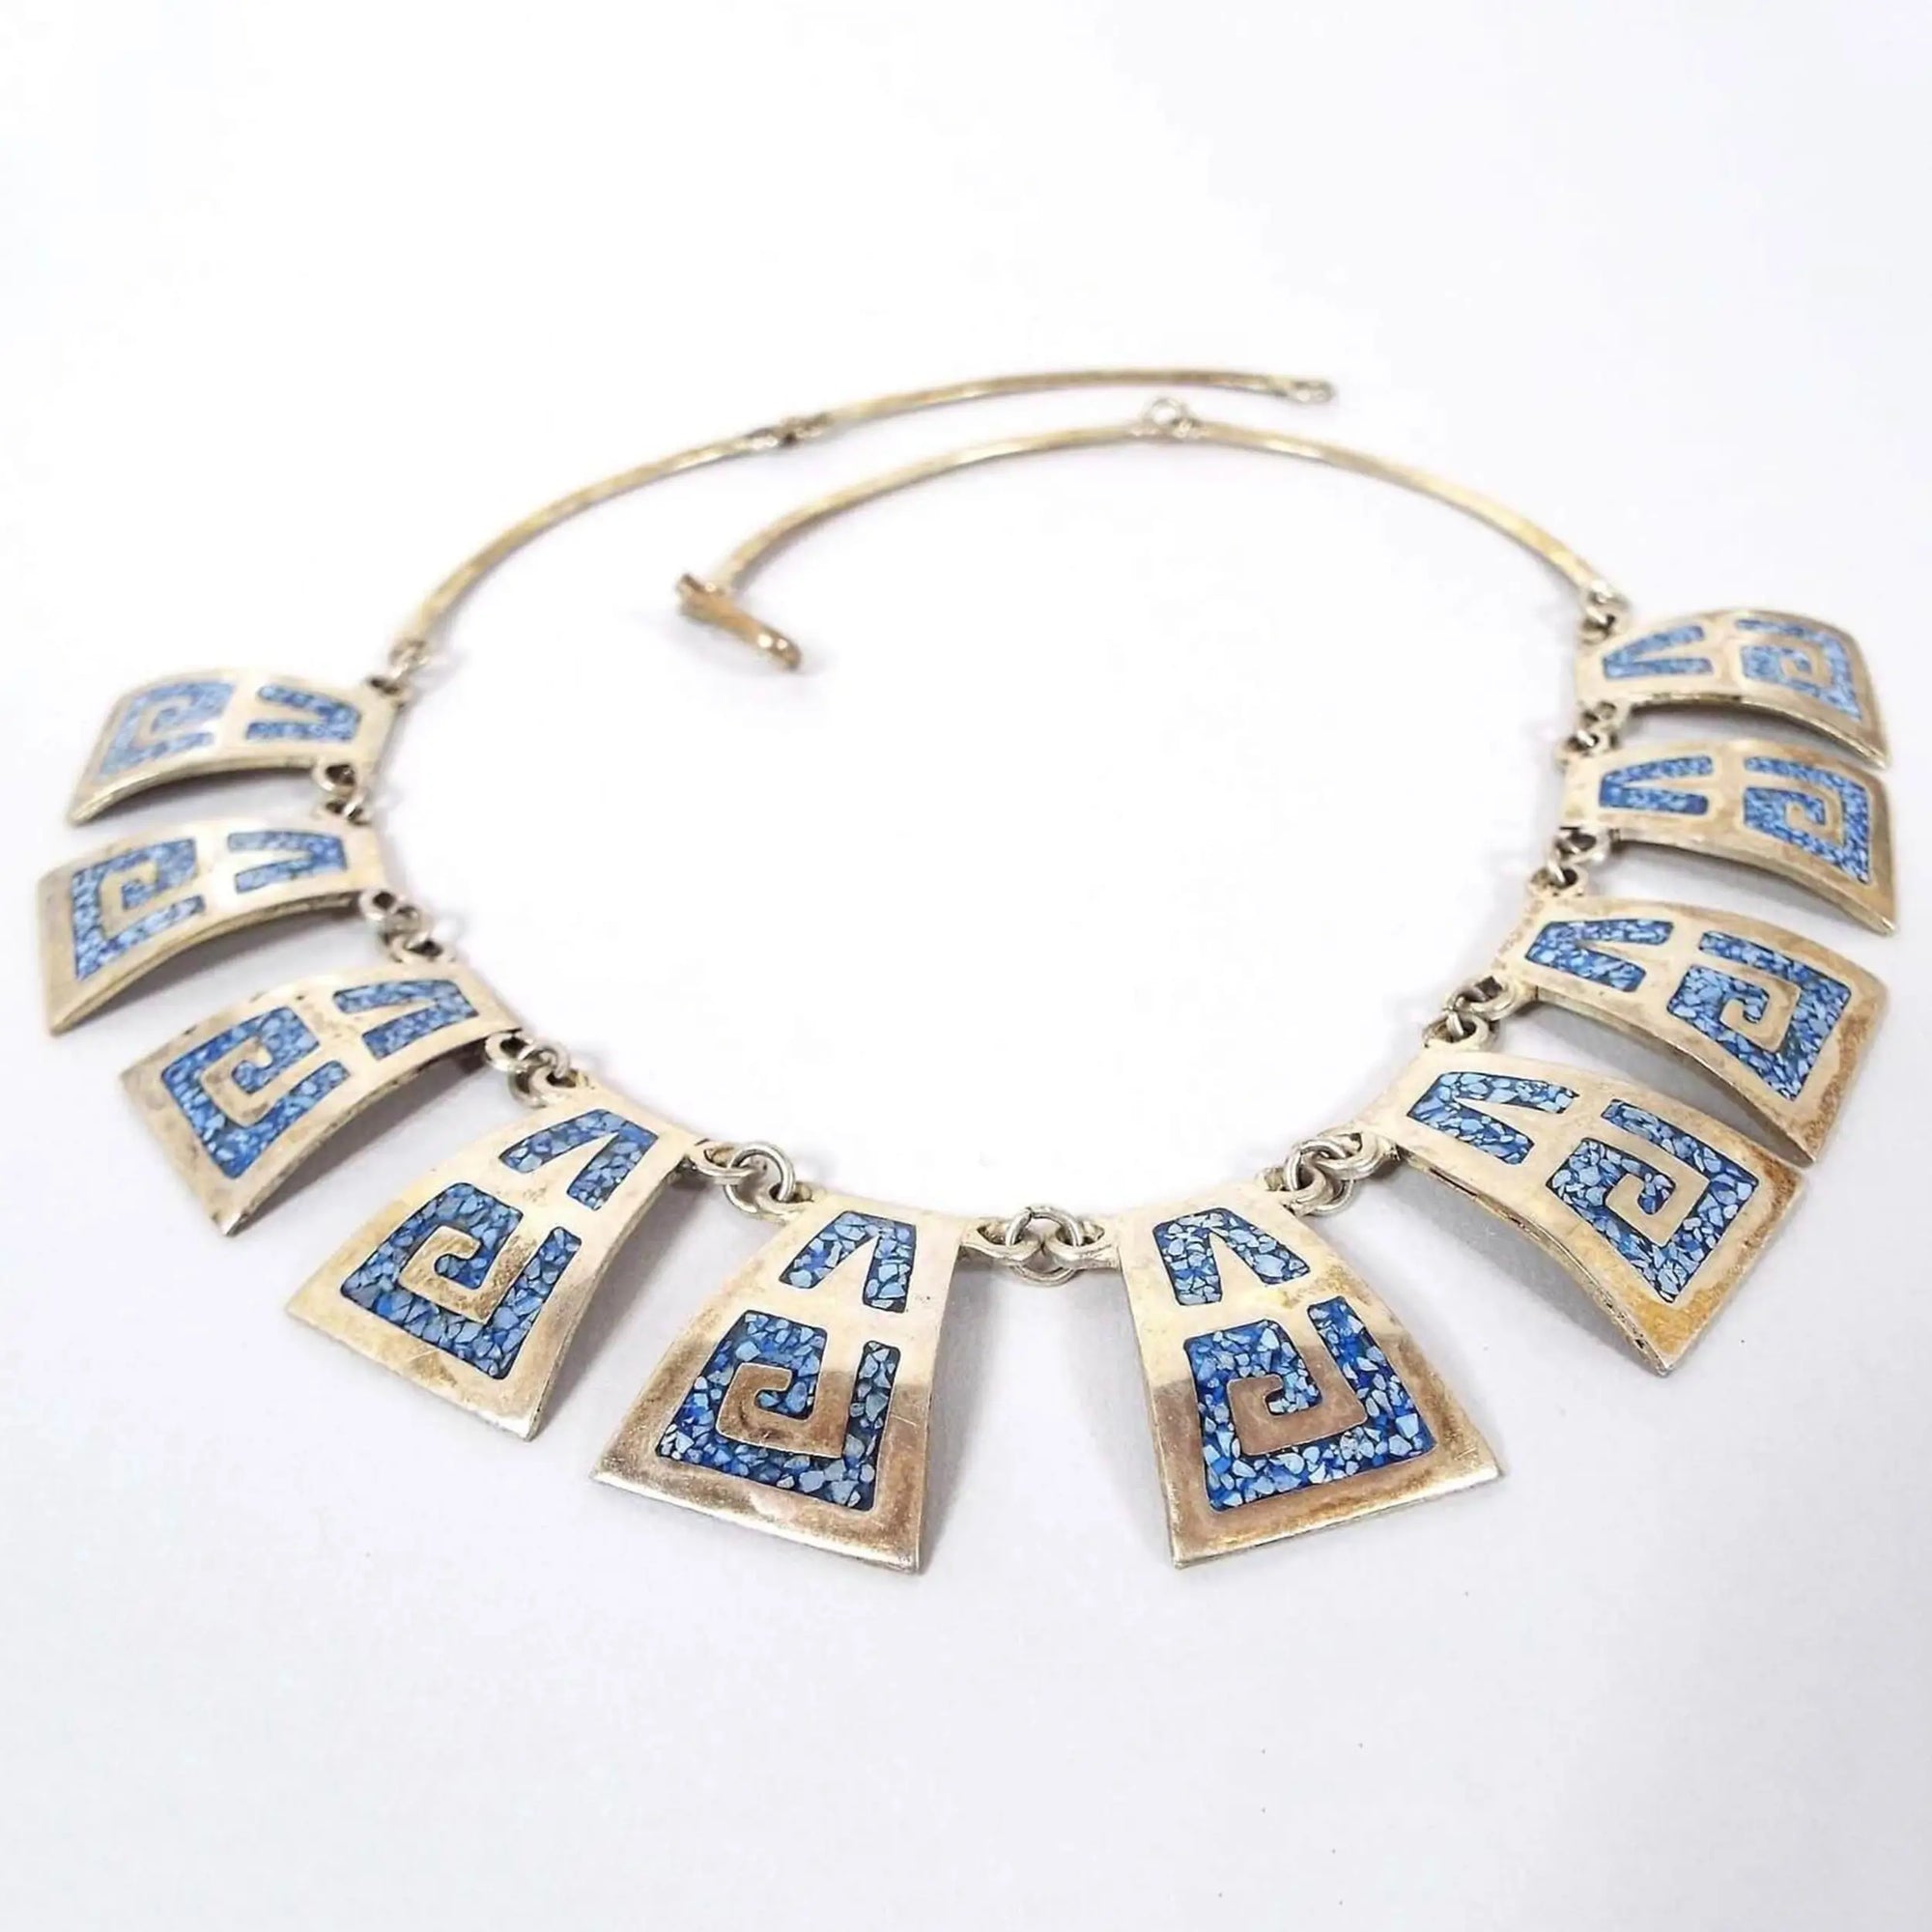 Top view of the retro vintage alpaca and sterling link necklace. The sterling links that form the top part of the necklace are curved rectangle shape with a hook clasp at the end. The bottom part has curved trapezoid shaped silver tone alpaca alloy links that are slightly curved outward. The links have a Southwestern design with tiny blue turquoise chips and resin.